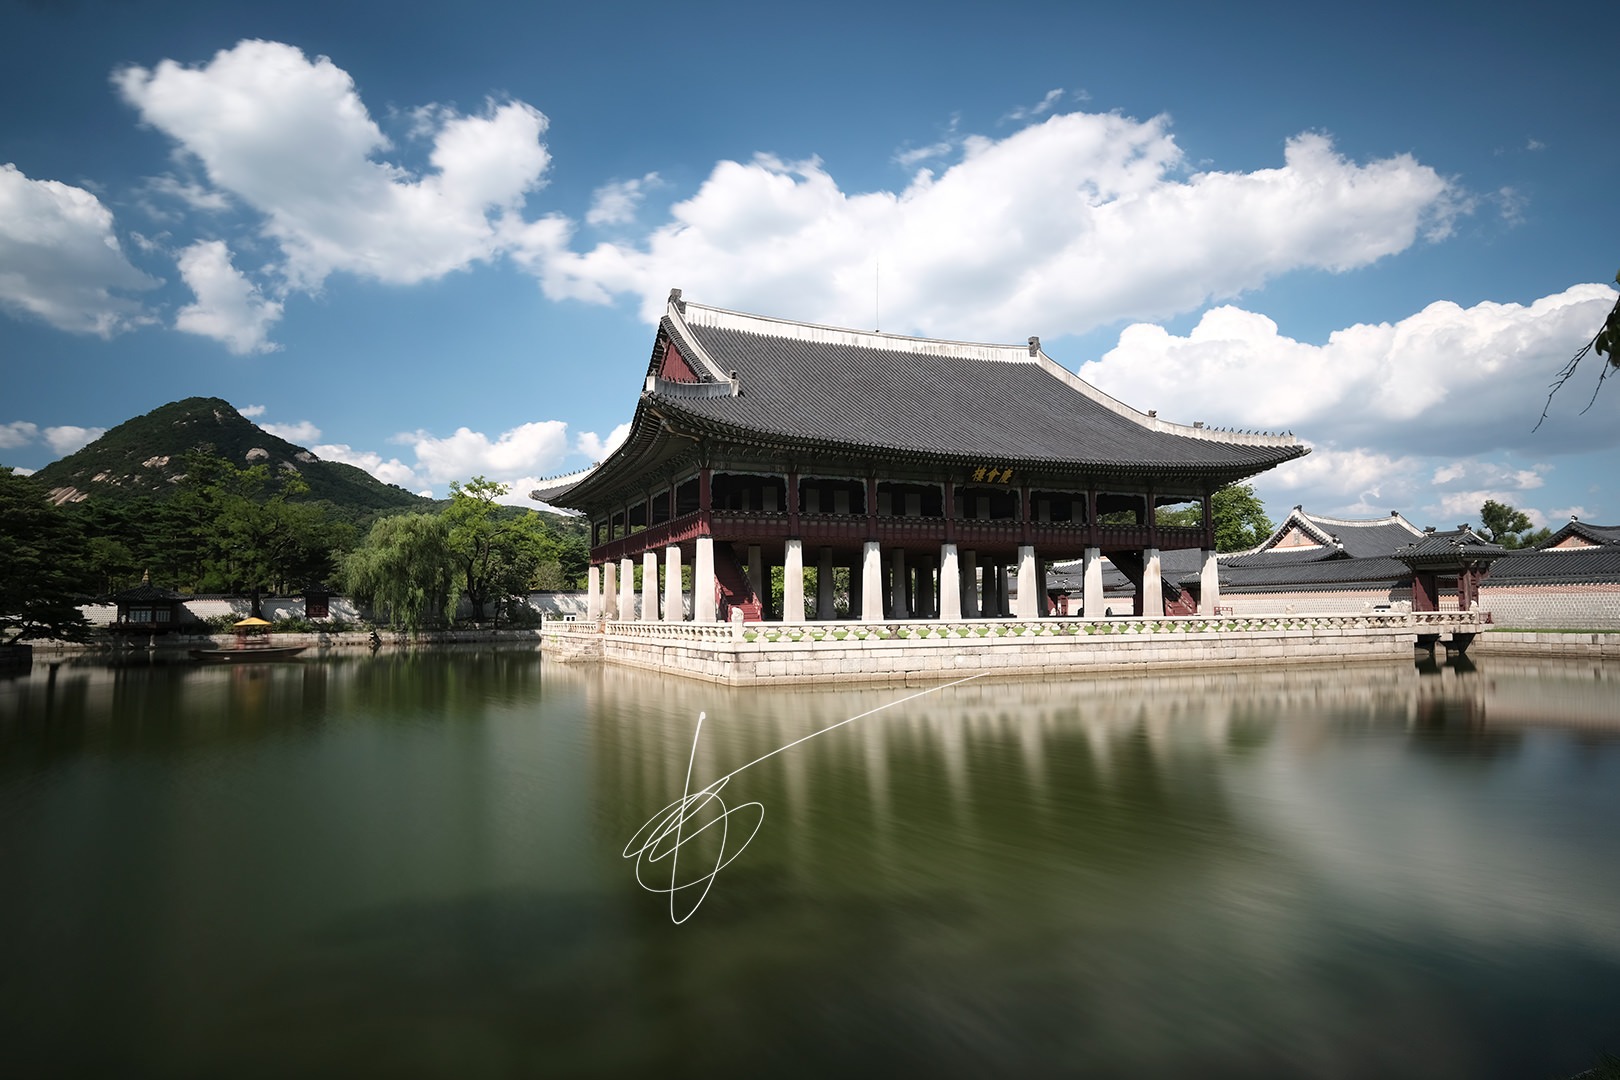 Seoul Highlights - A scene from the the 5 Grand Palaces in Seoul